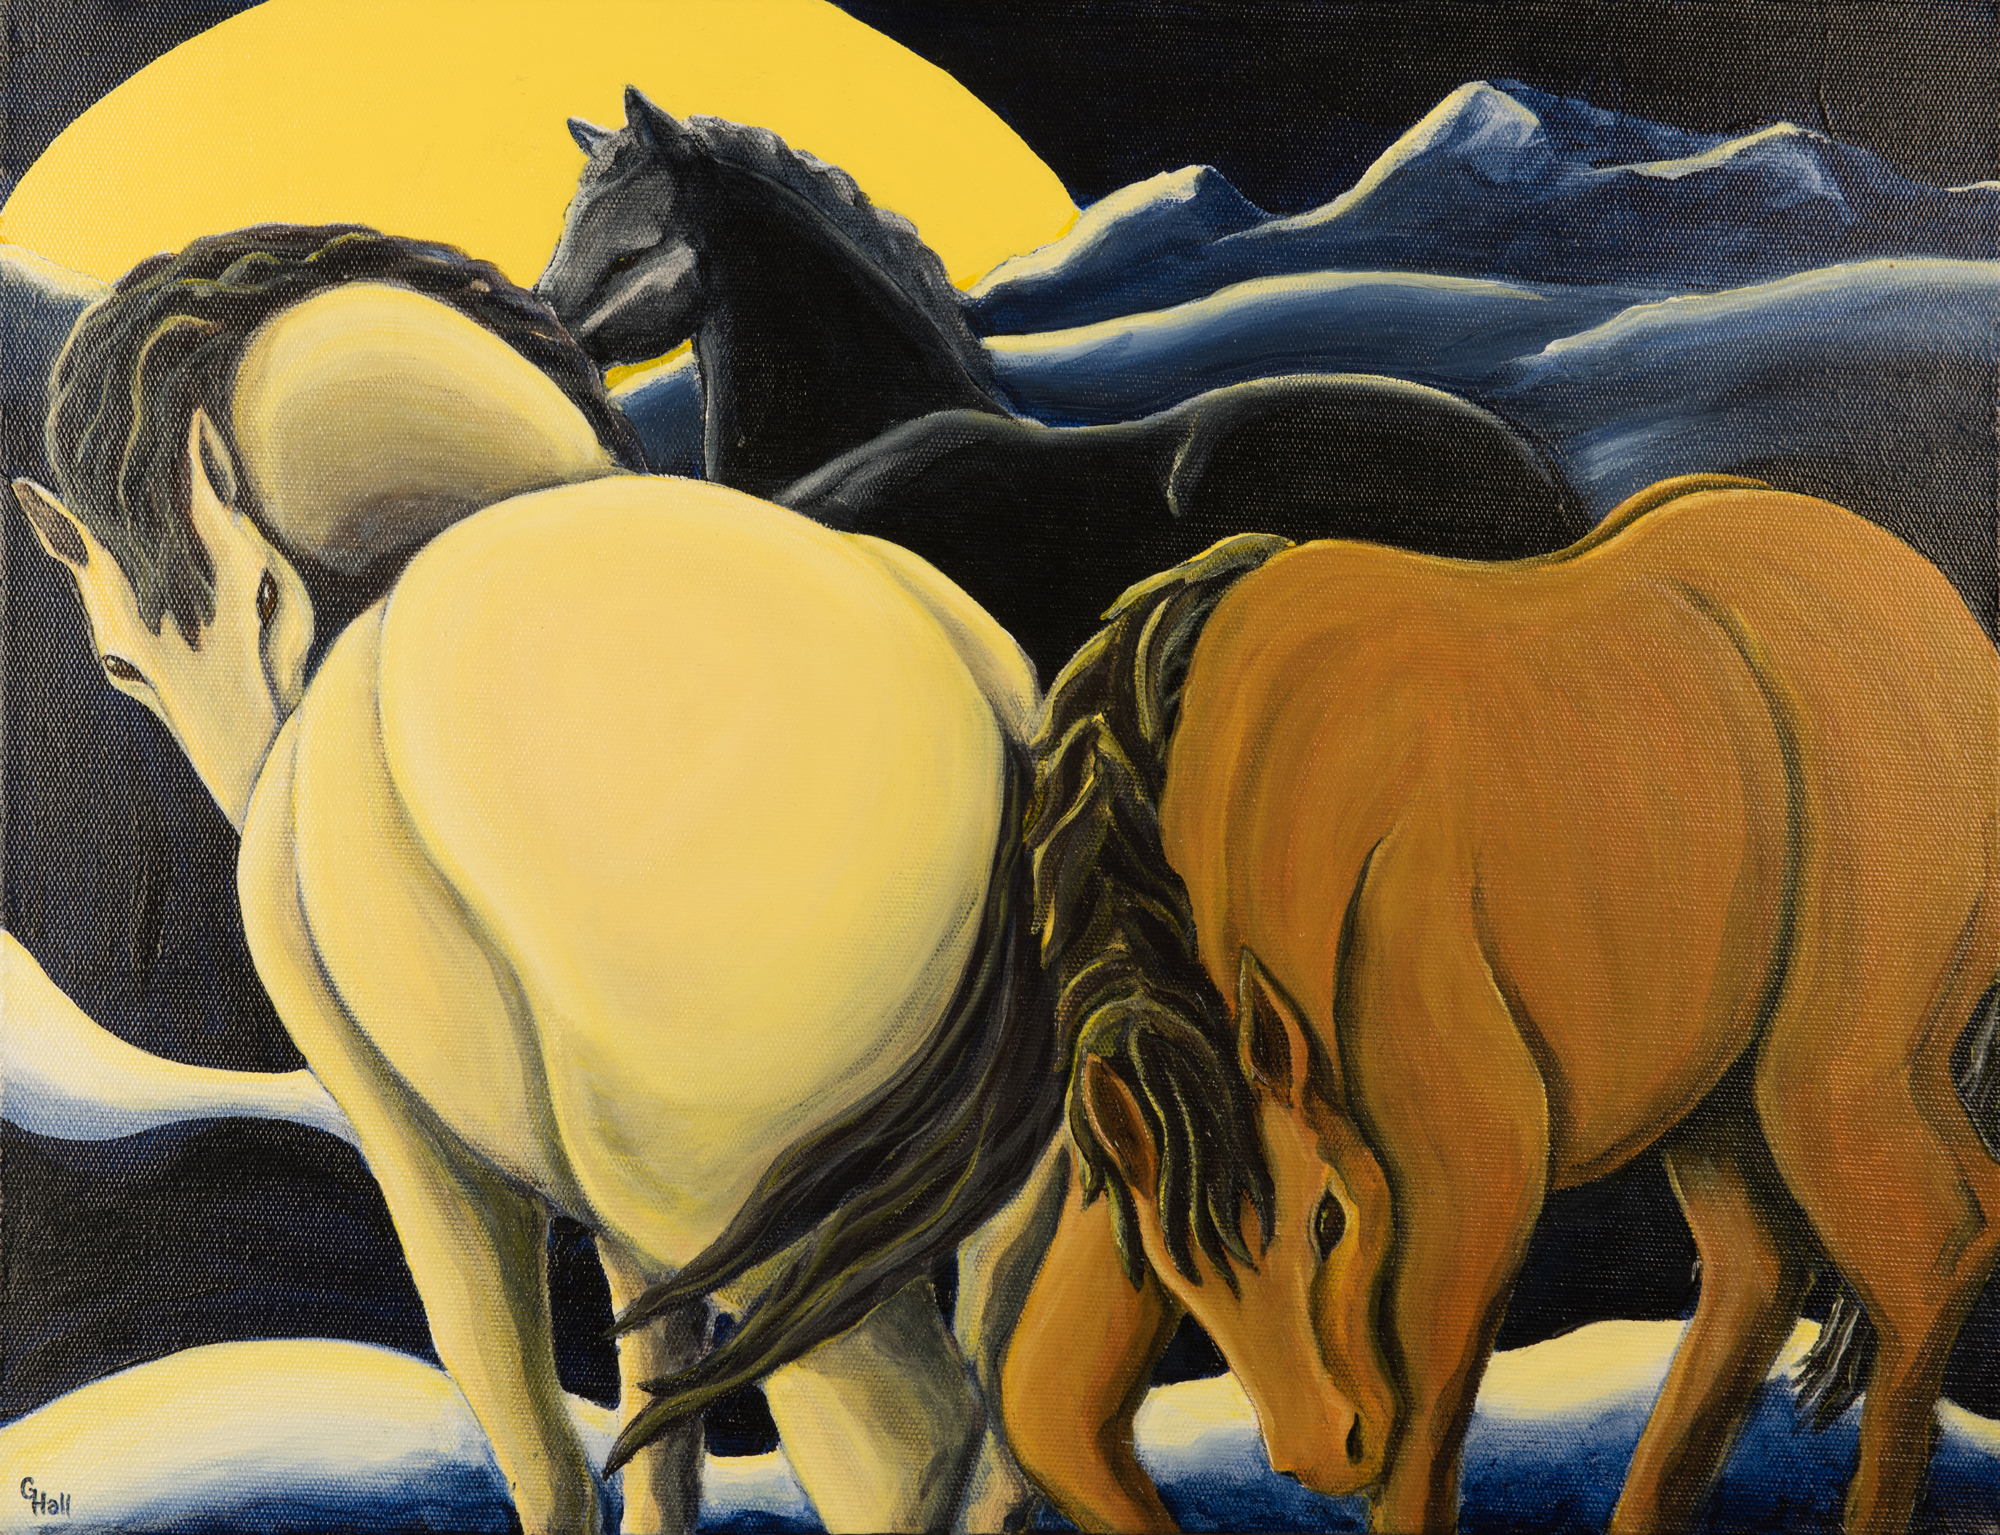 A painting by Ginny Hall depicting three horses.